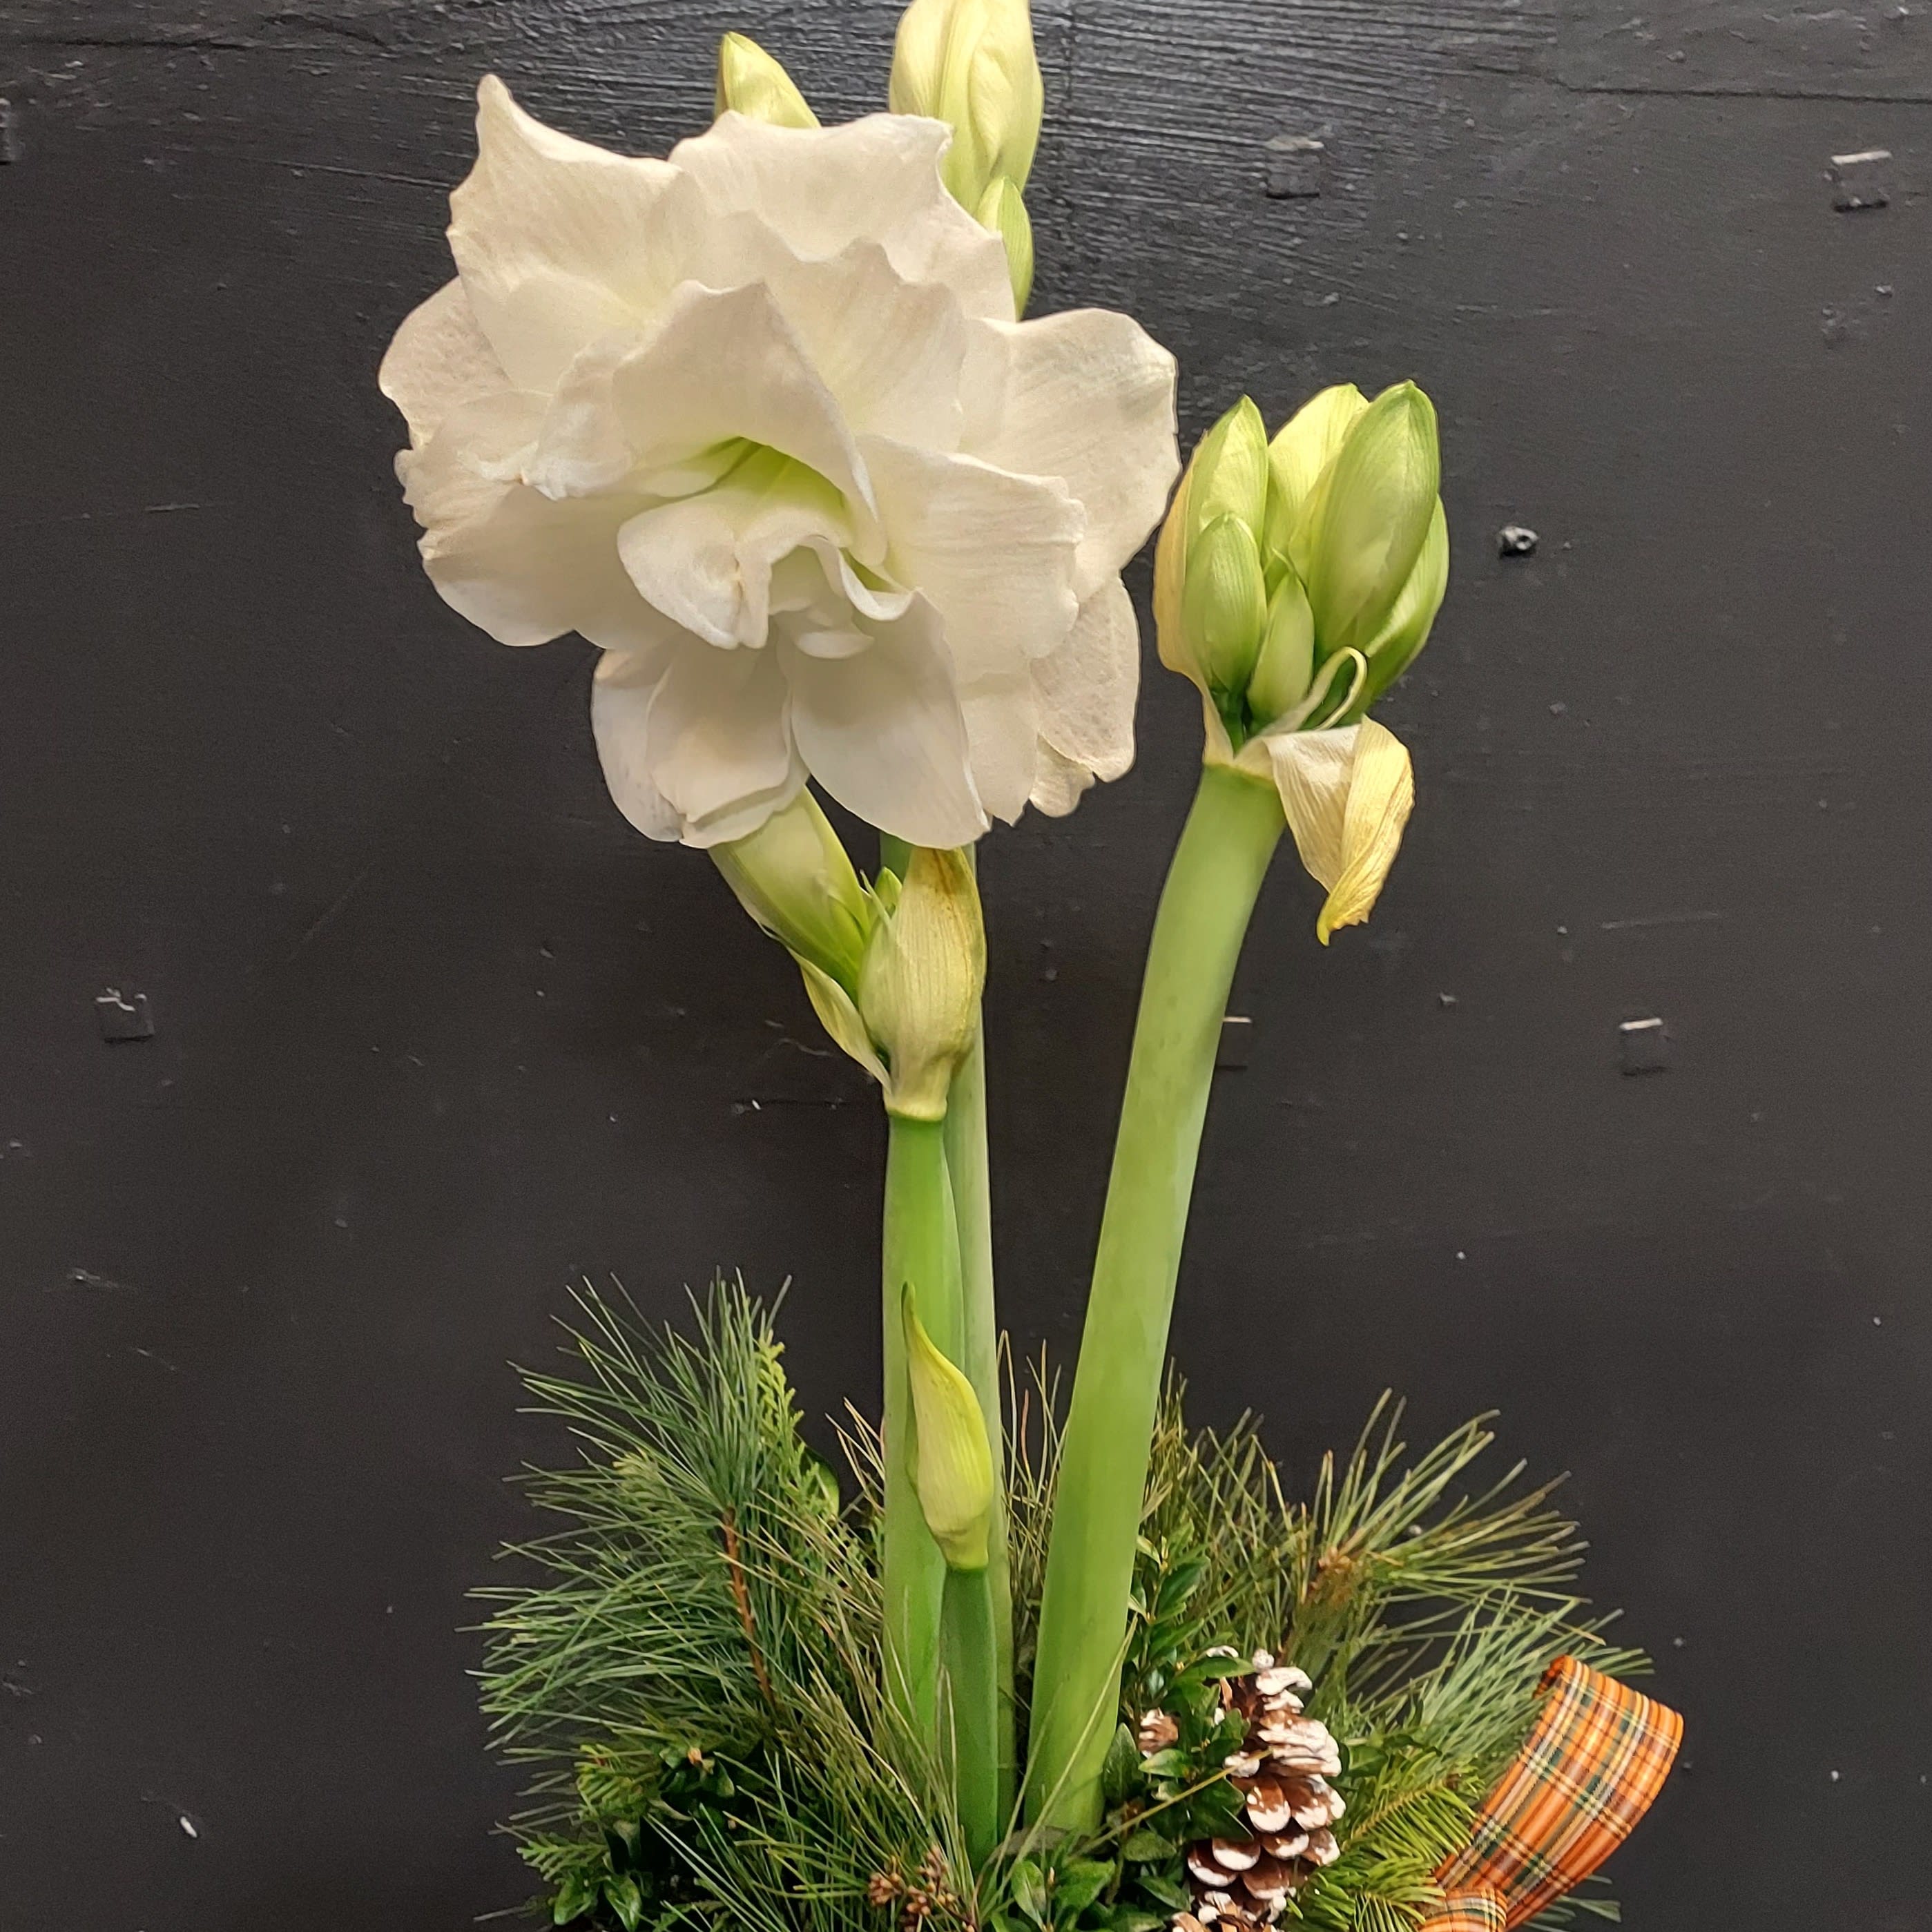 Amazing Amaryllis - This beautiful bulb flower will make a big hit at your holiday party.  Complete with mixed evergreens and a festive bow &amp; container.  Perfect as a centerpiece to add drama to your table  or as a hostess gift.  